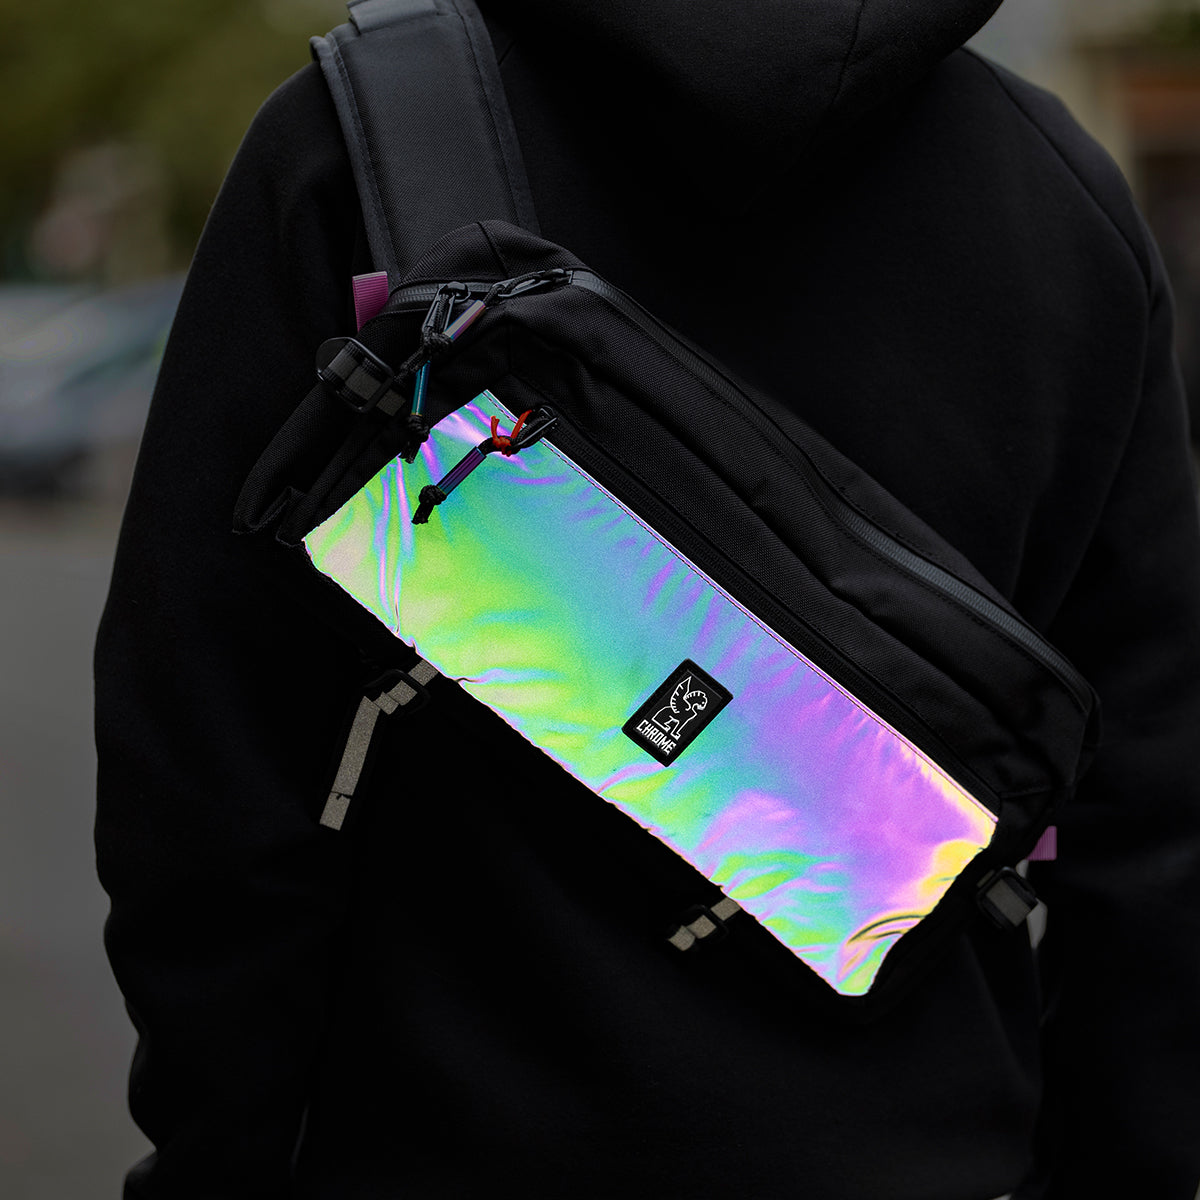 Reflective backpack with man and blurry street